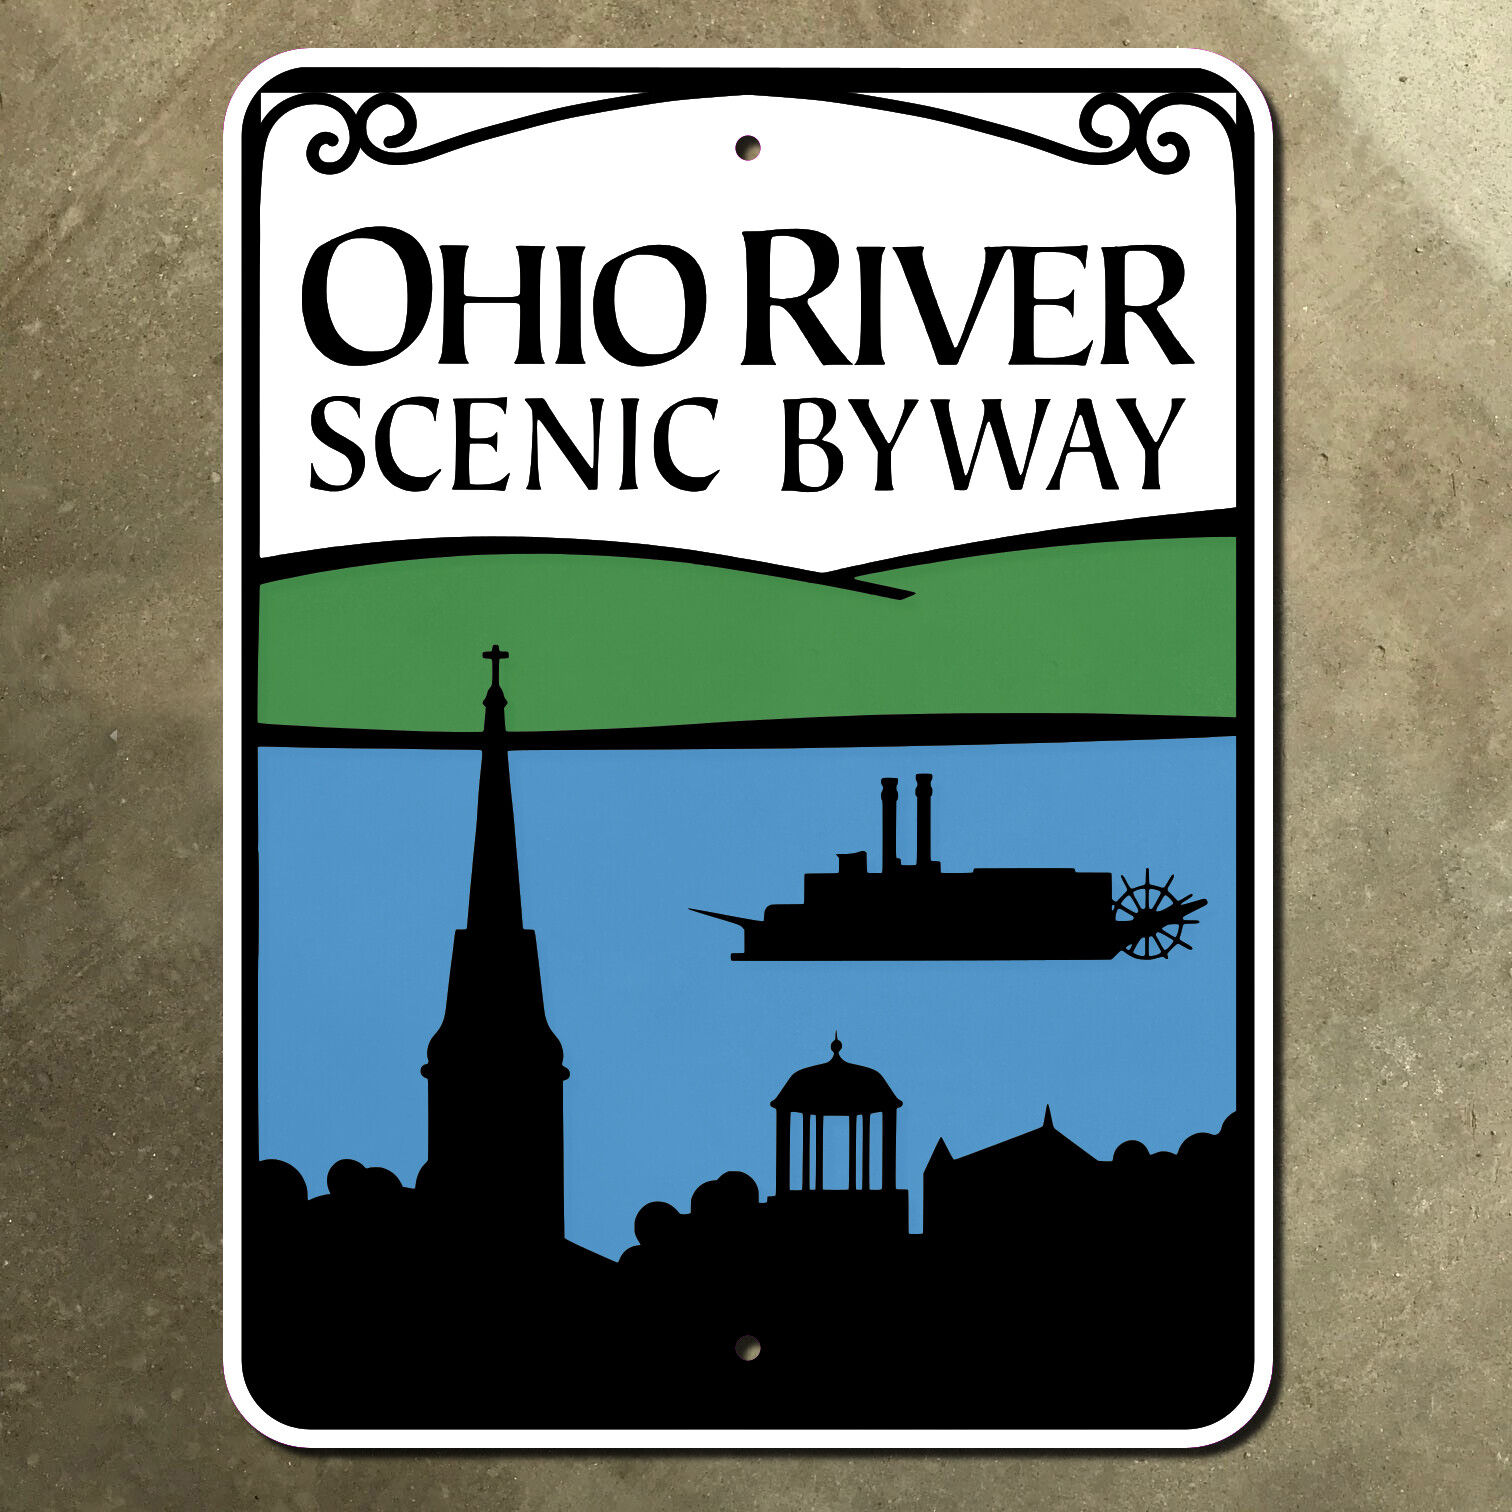 Ohio River Scenic Byway marker highway road sign 2006 Illinois Indiana 18x24